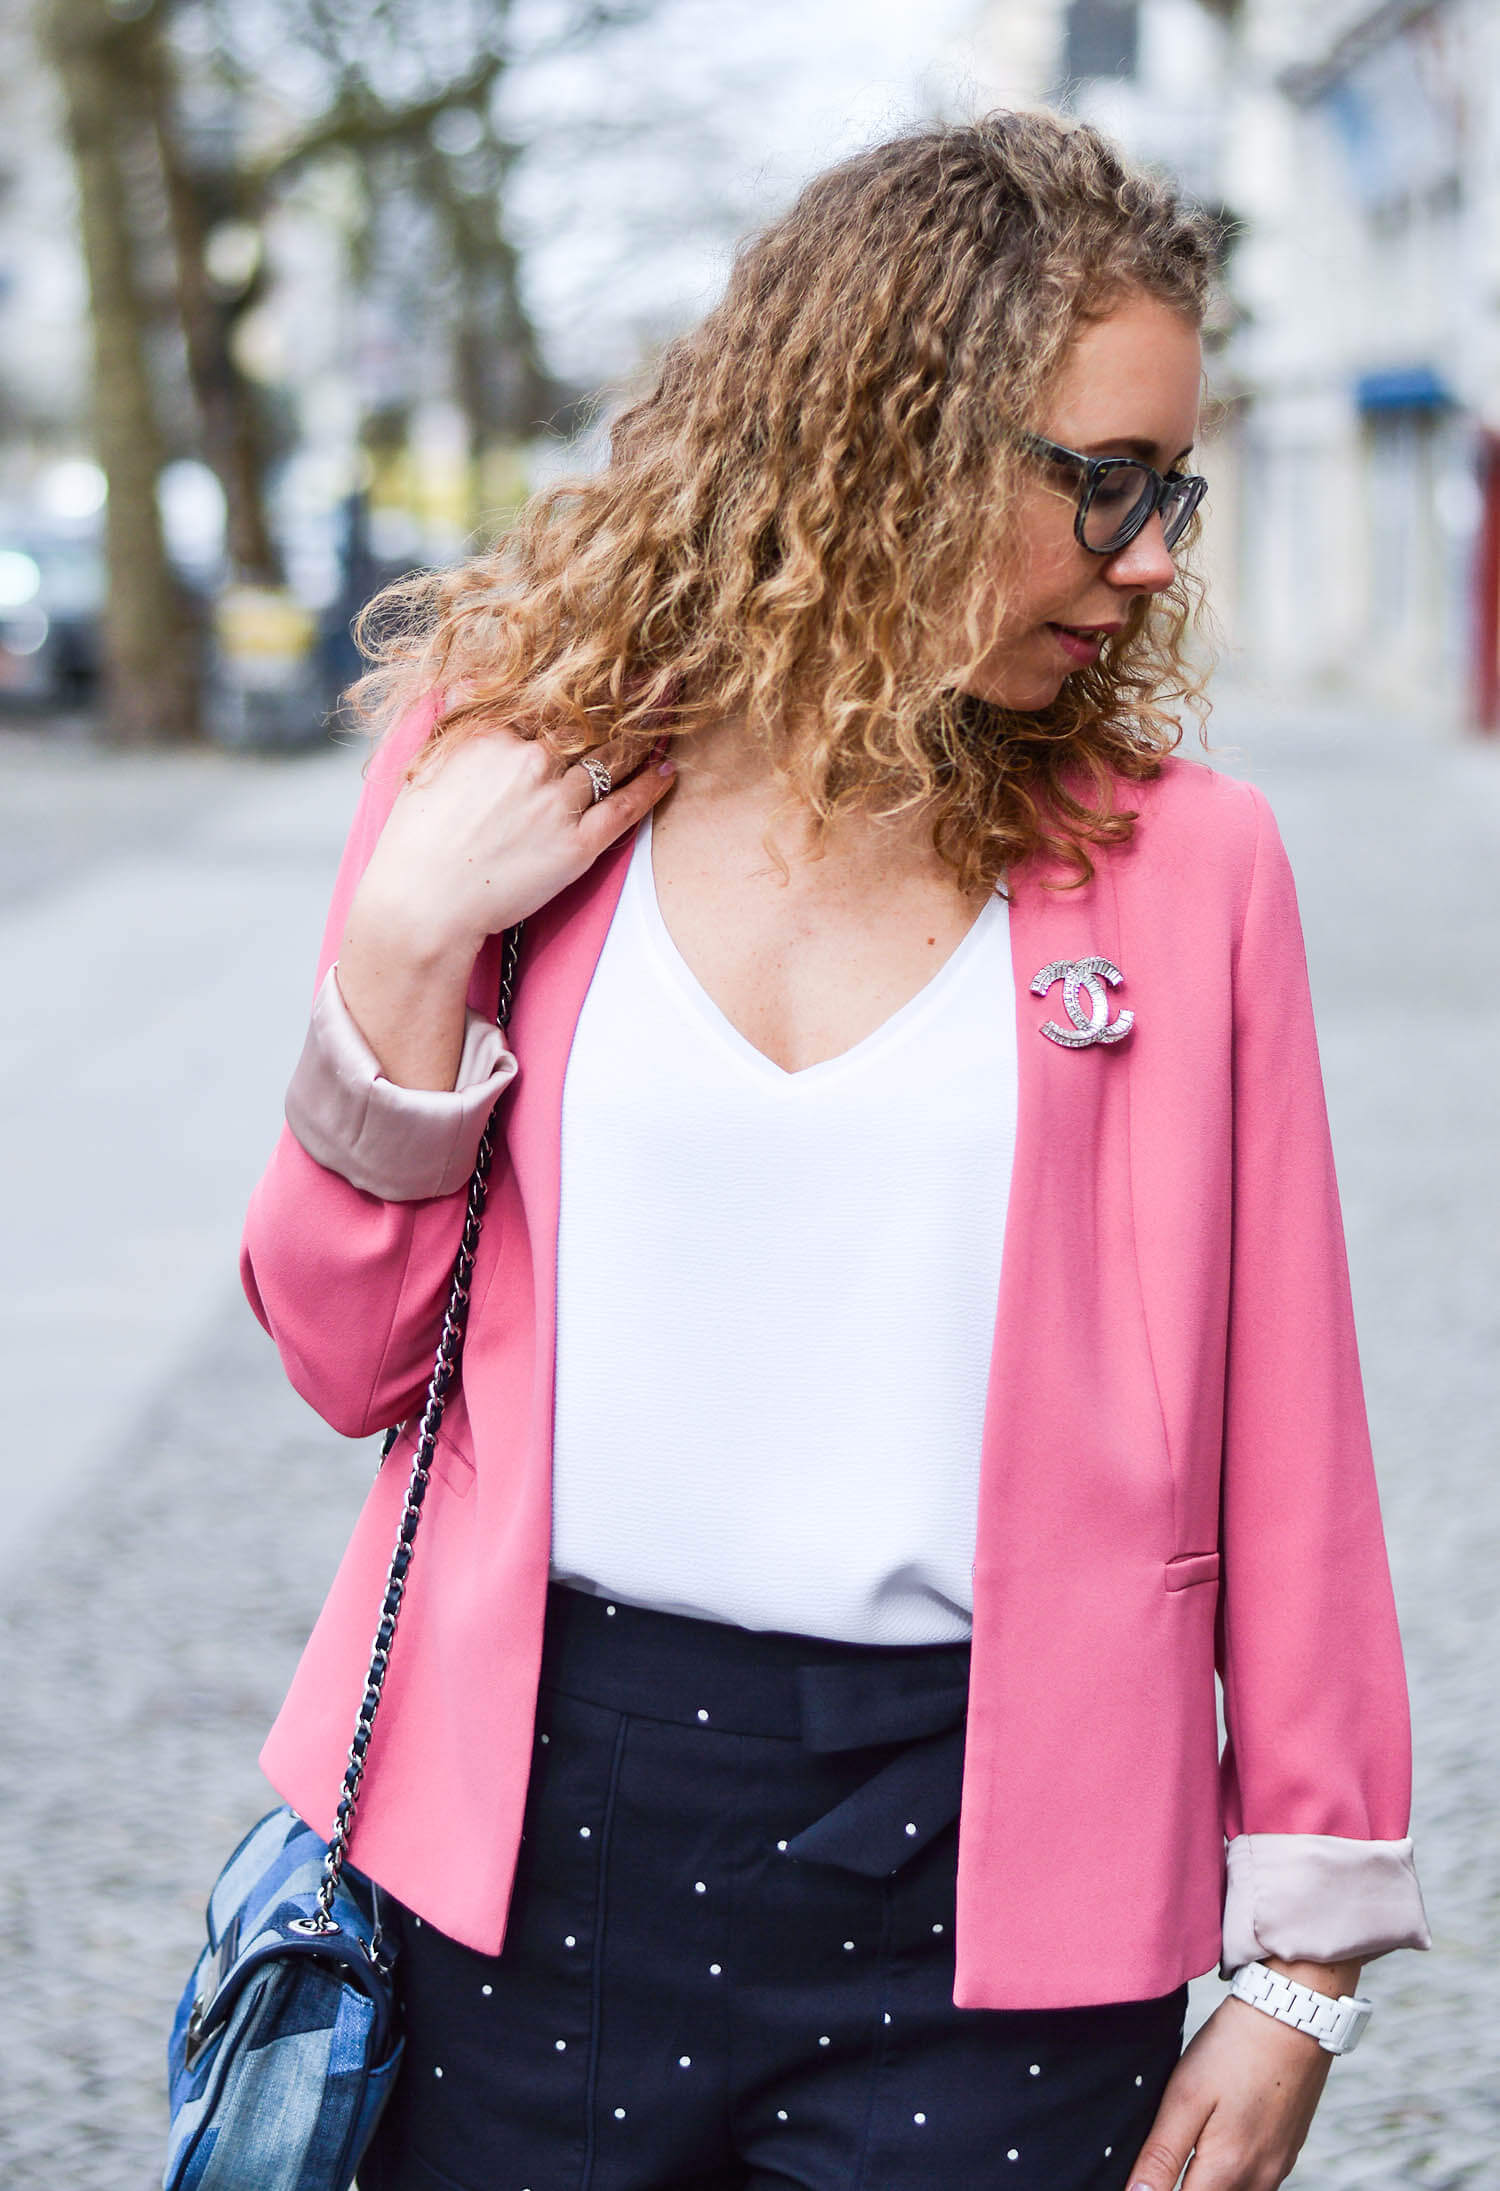 Kationette-fashionblog-nrw-Outfit-Spring-Look-Pink-Blazer-Shorts-Dandy-Shoes-streetstyle